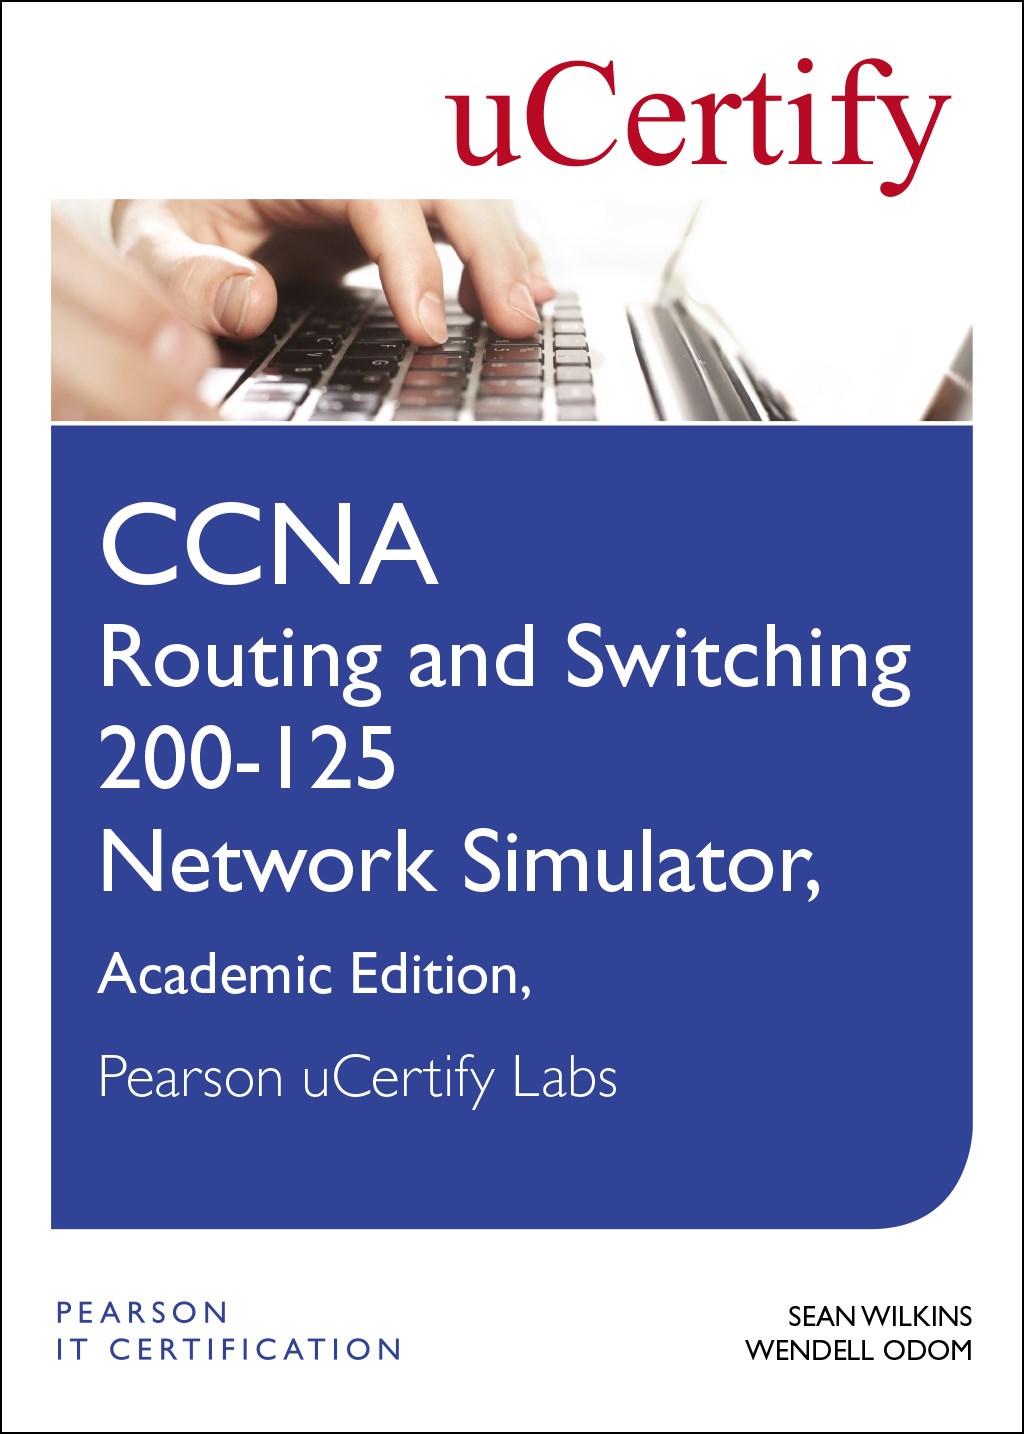 CCNA Routing and Switching 200-125 Network Simulator, Pearson uCertify Academic Edition Student Access Card